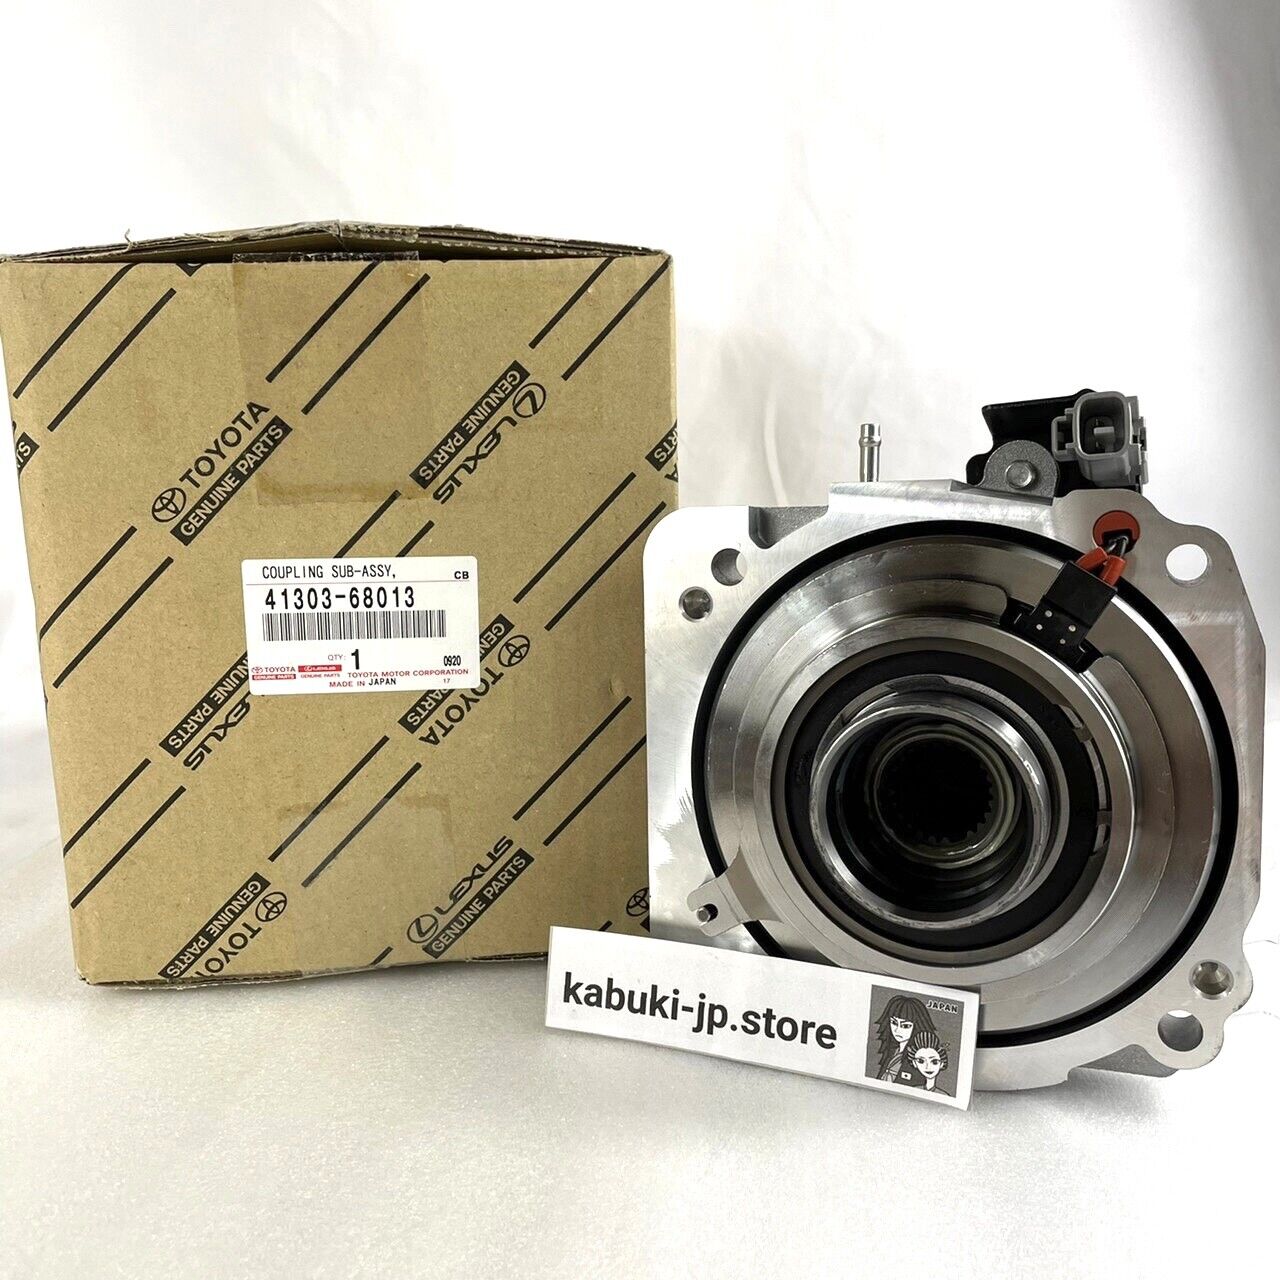 Toyota Genuine 41303-68013 Electromagnetic Control Coupling SUB-ASSY From Japan